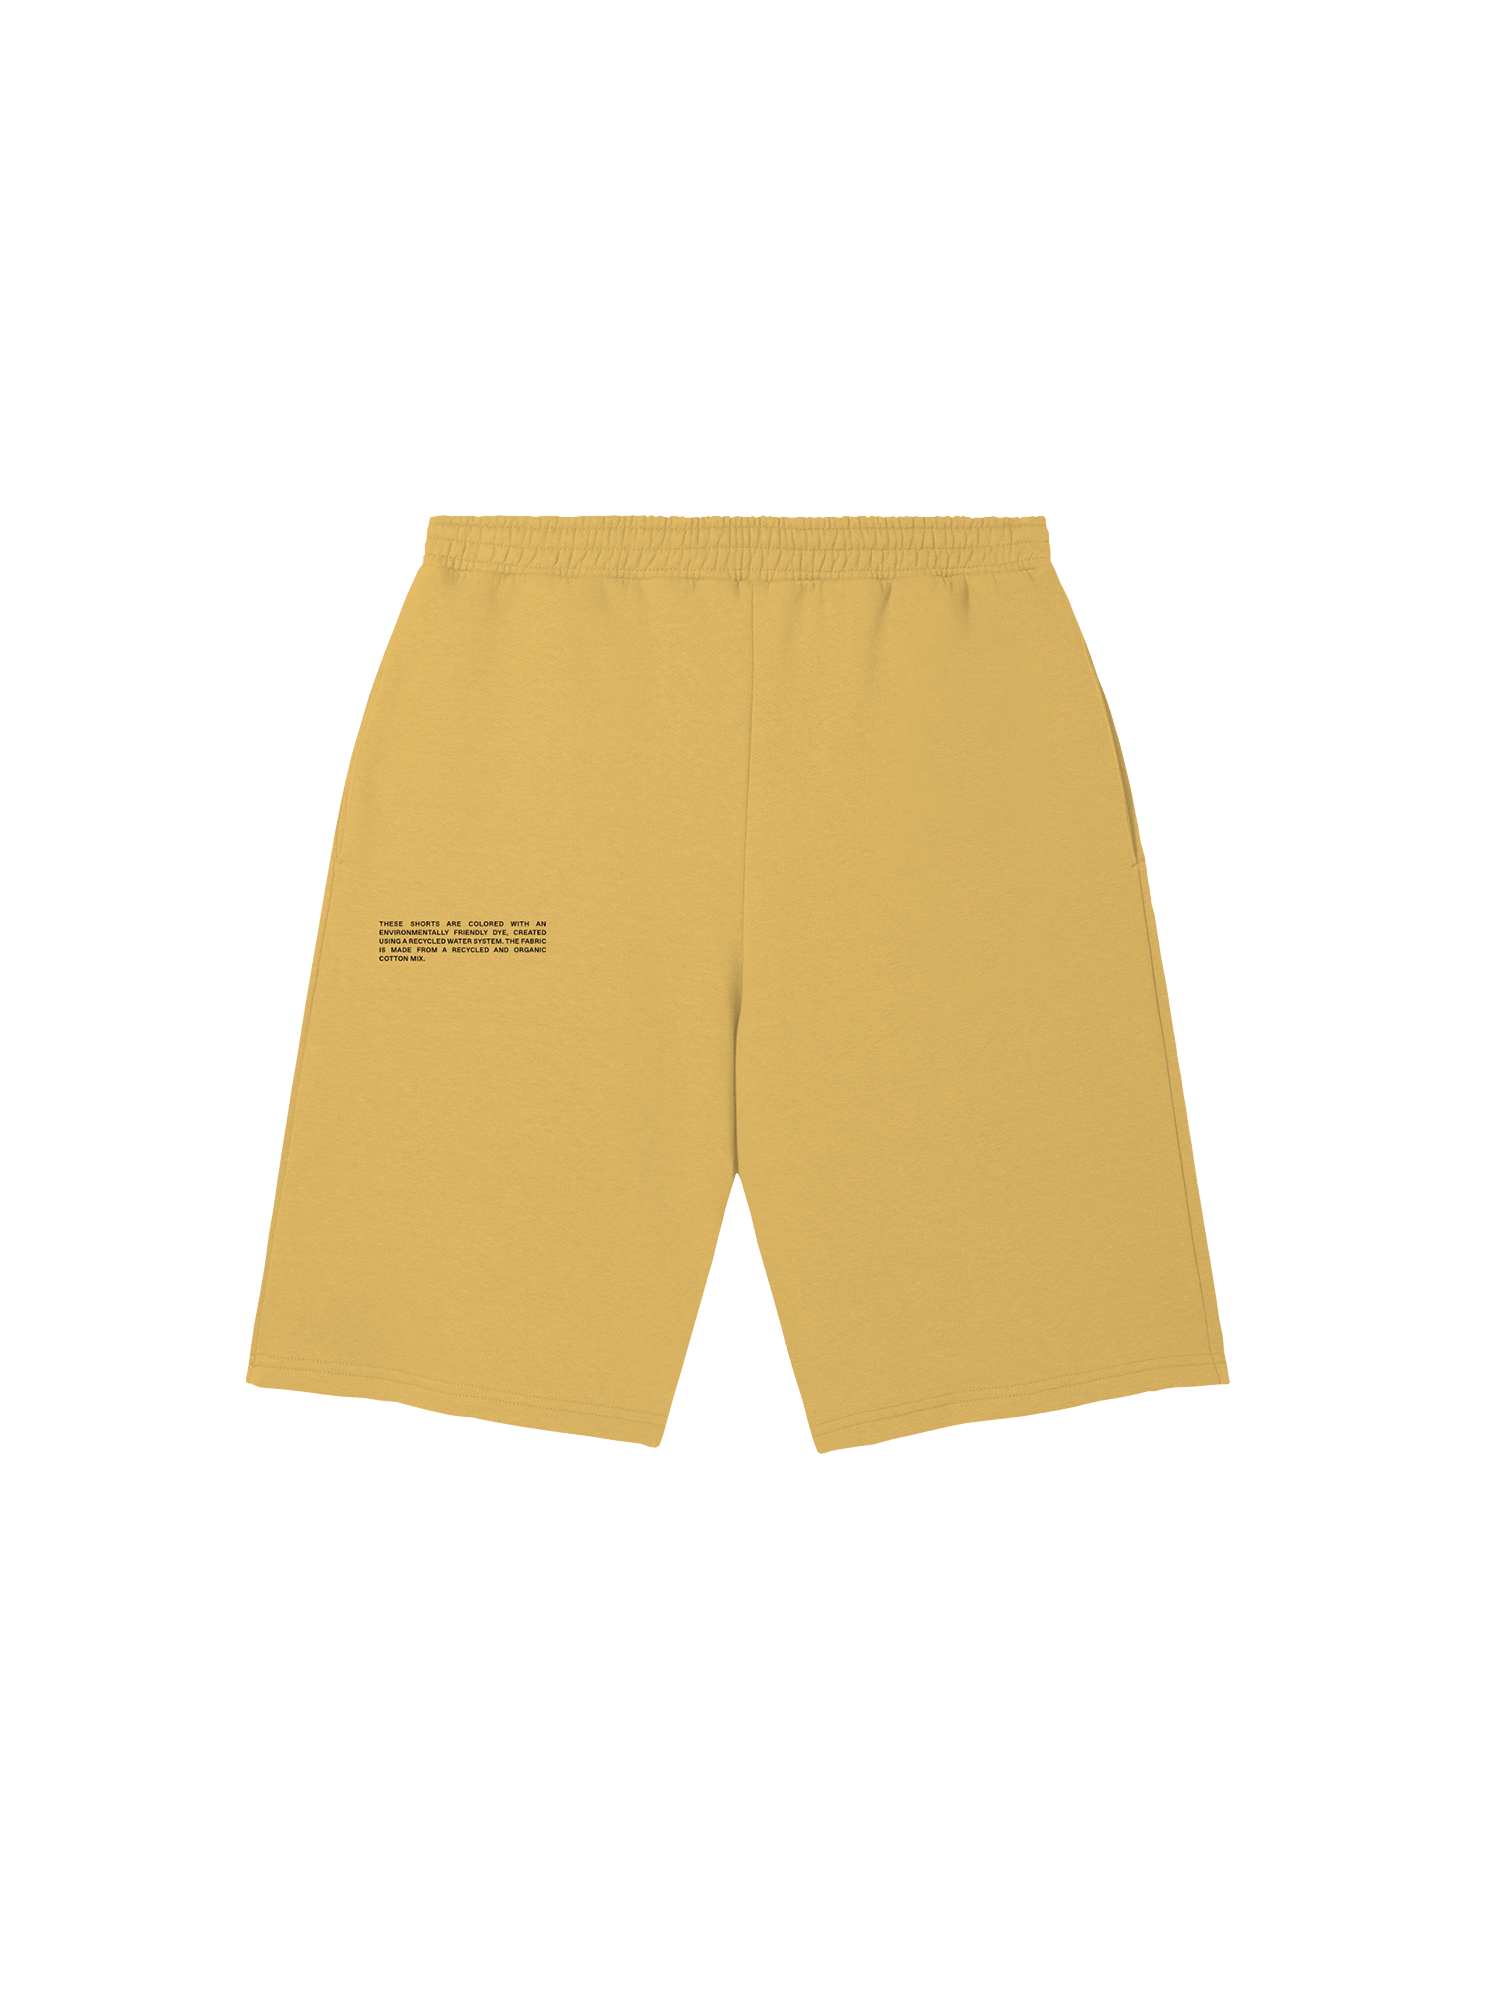 https://storage.googleapis.com/download/storage/v1/b/whering.appspot.com/o/marketplace_product_images%2Fpangaia-archive-lightweight-recycled-cotton-long-shortsspicy-mustard-8bFi2PGrcYR6e9nJAqdjp2.png?generation=1692680427637253&alt=media